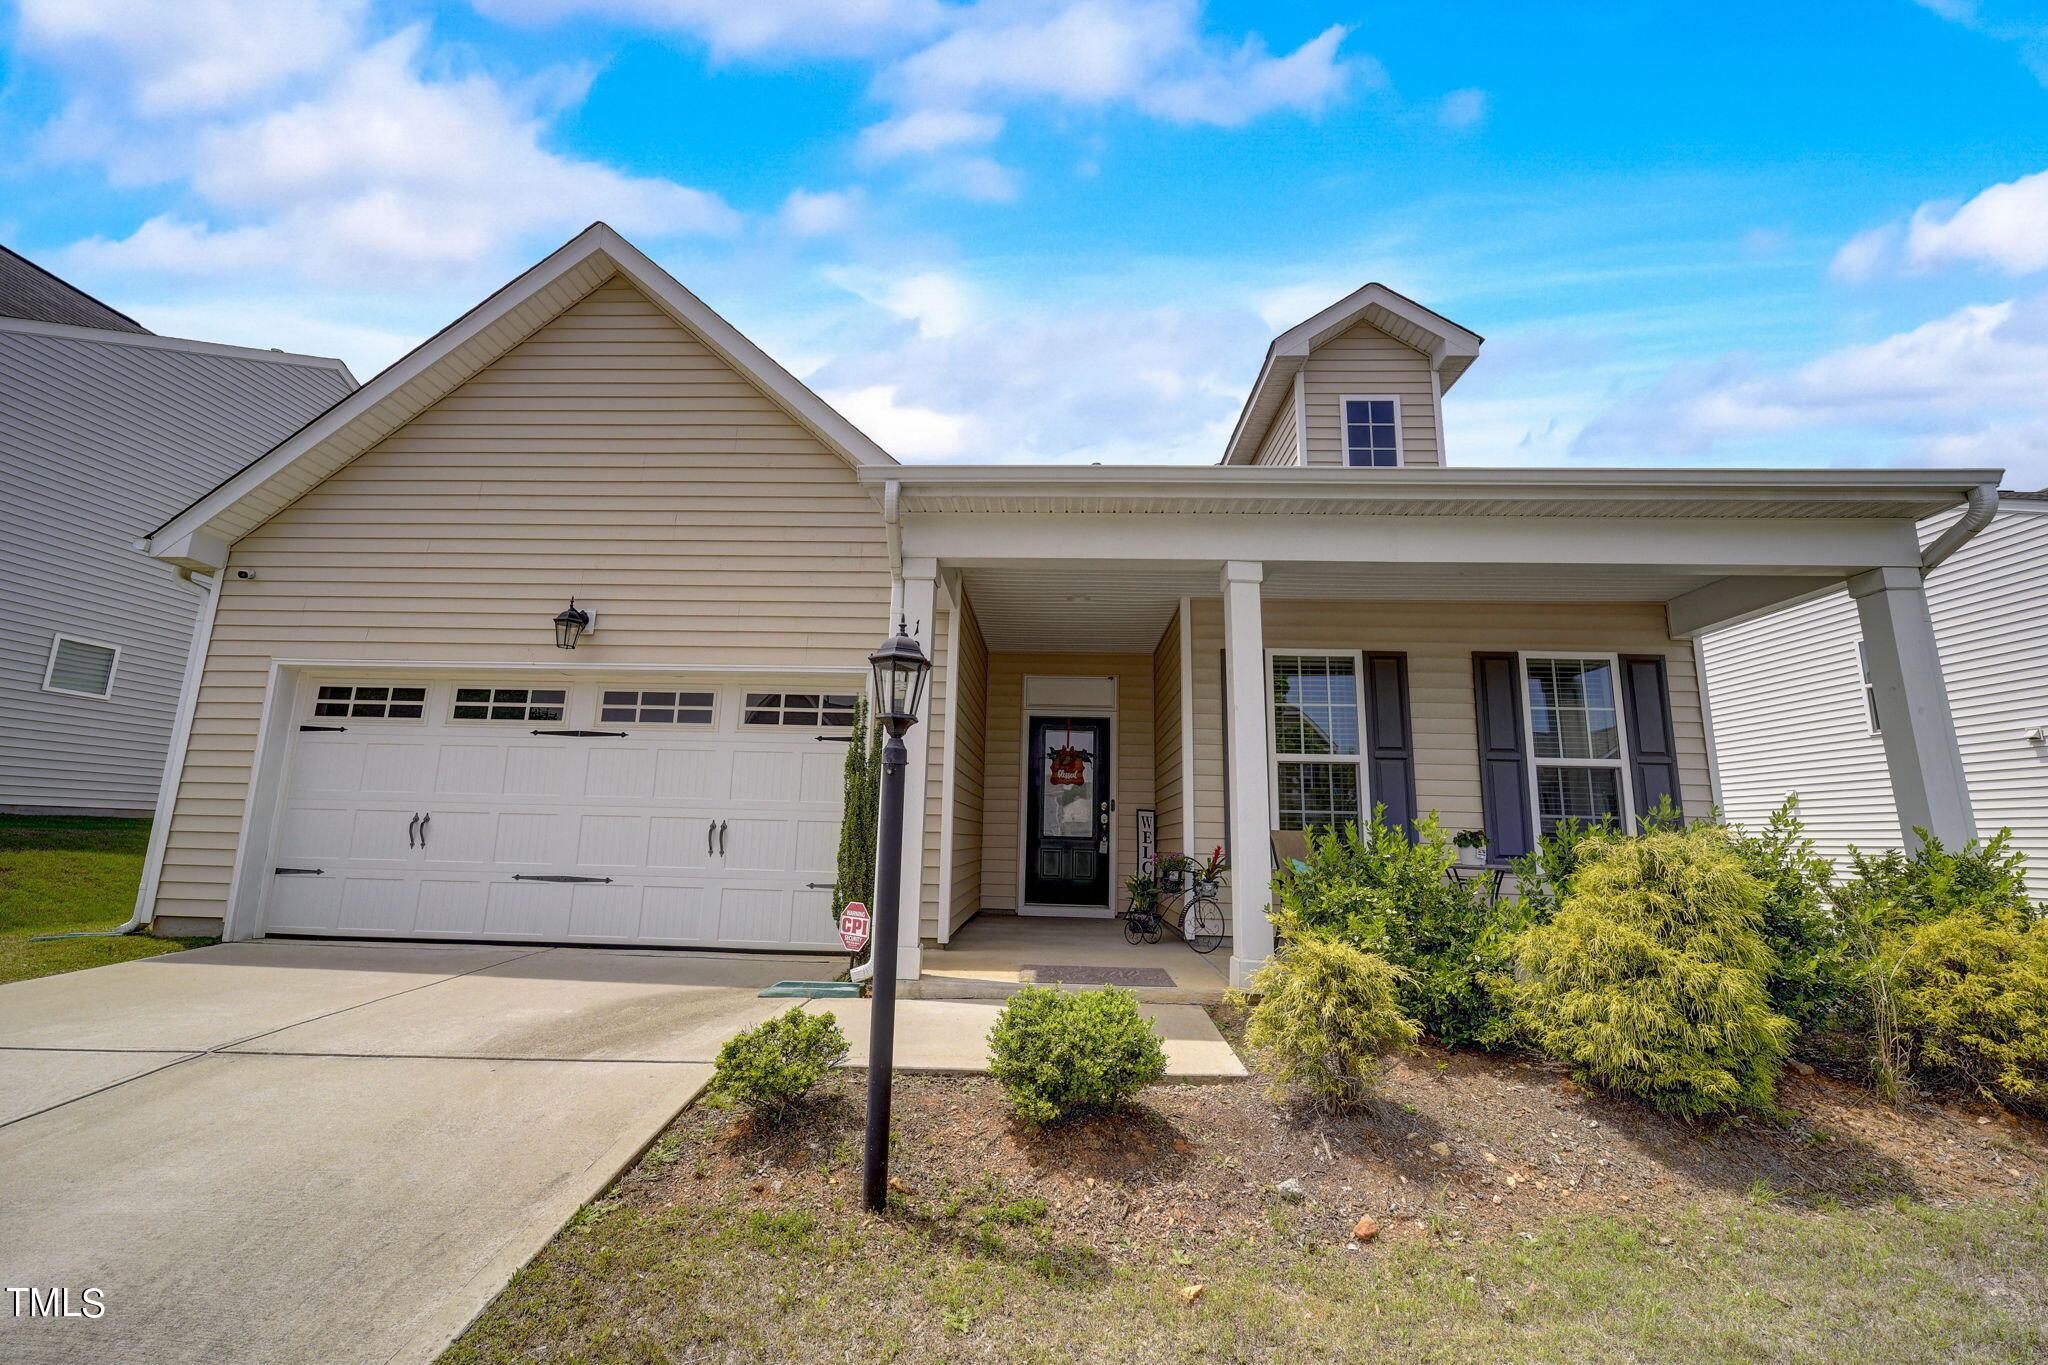 Photo one of 19 N Stonehaven Way Clayton NC 27527 | MLS 10022171